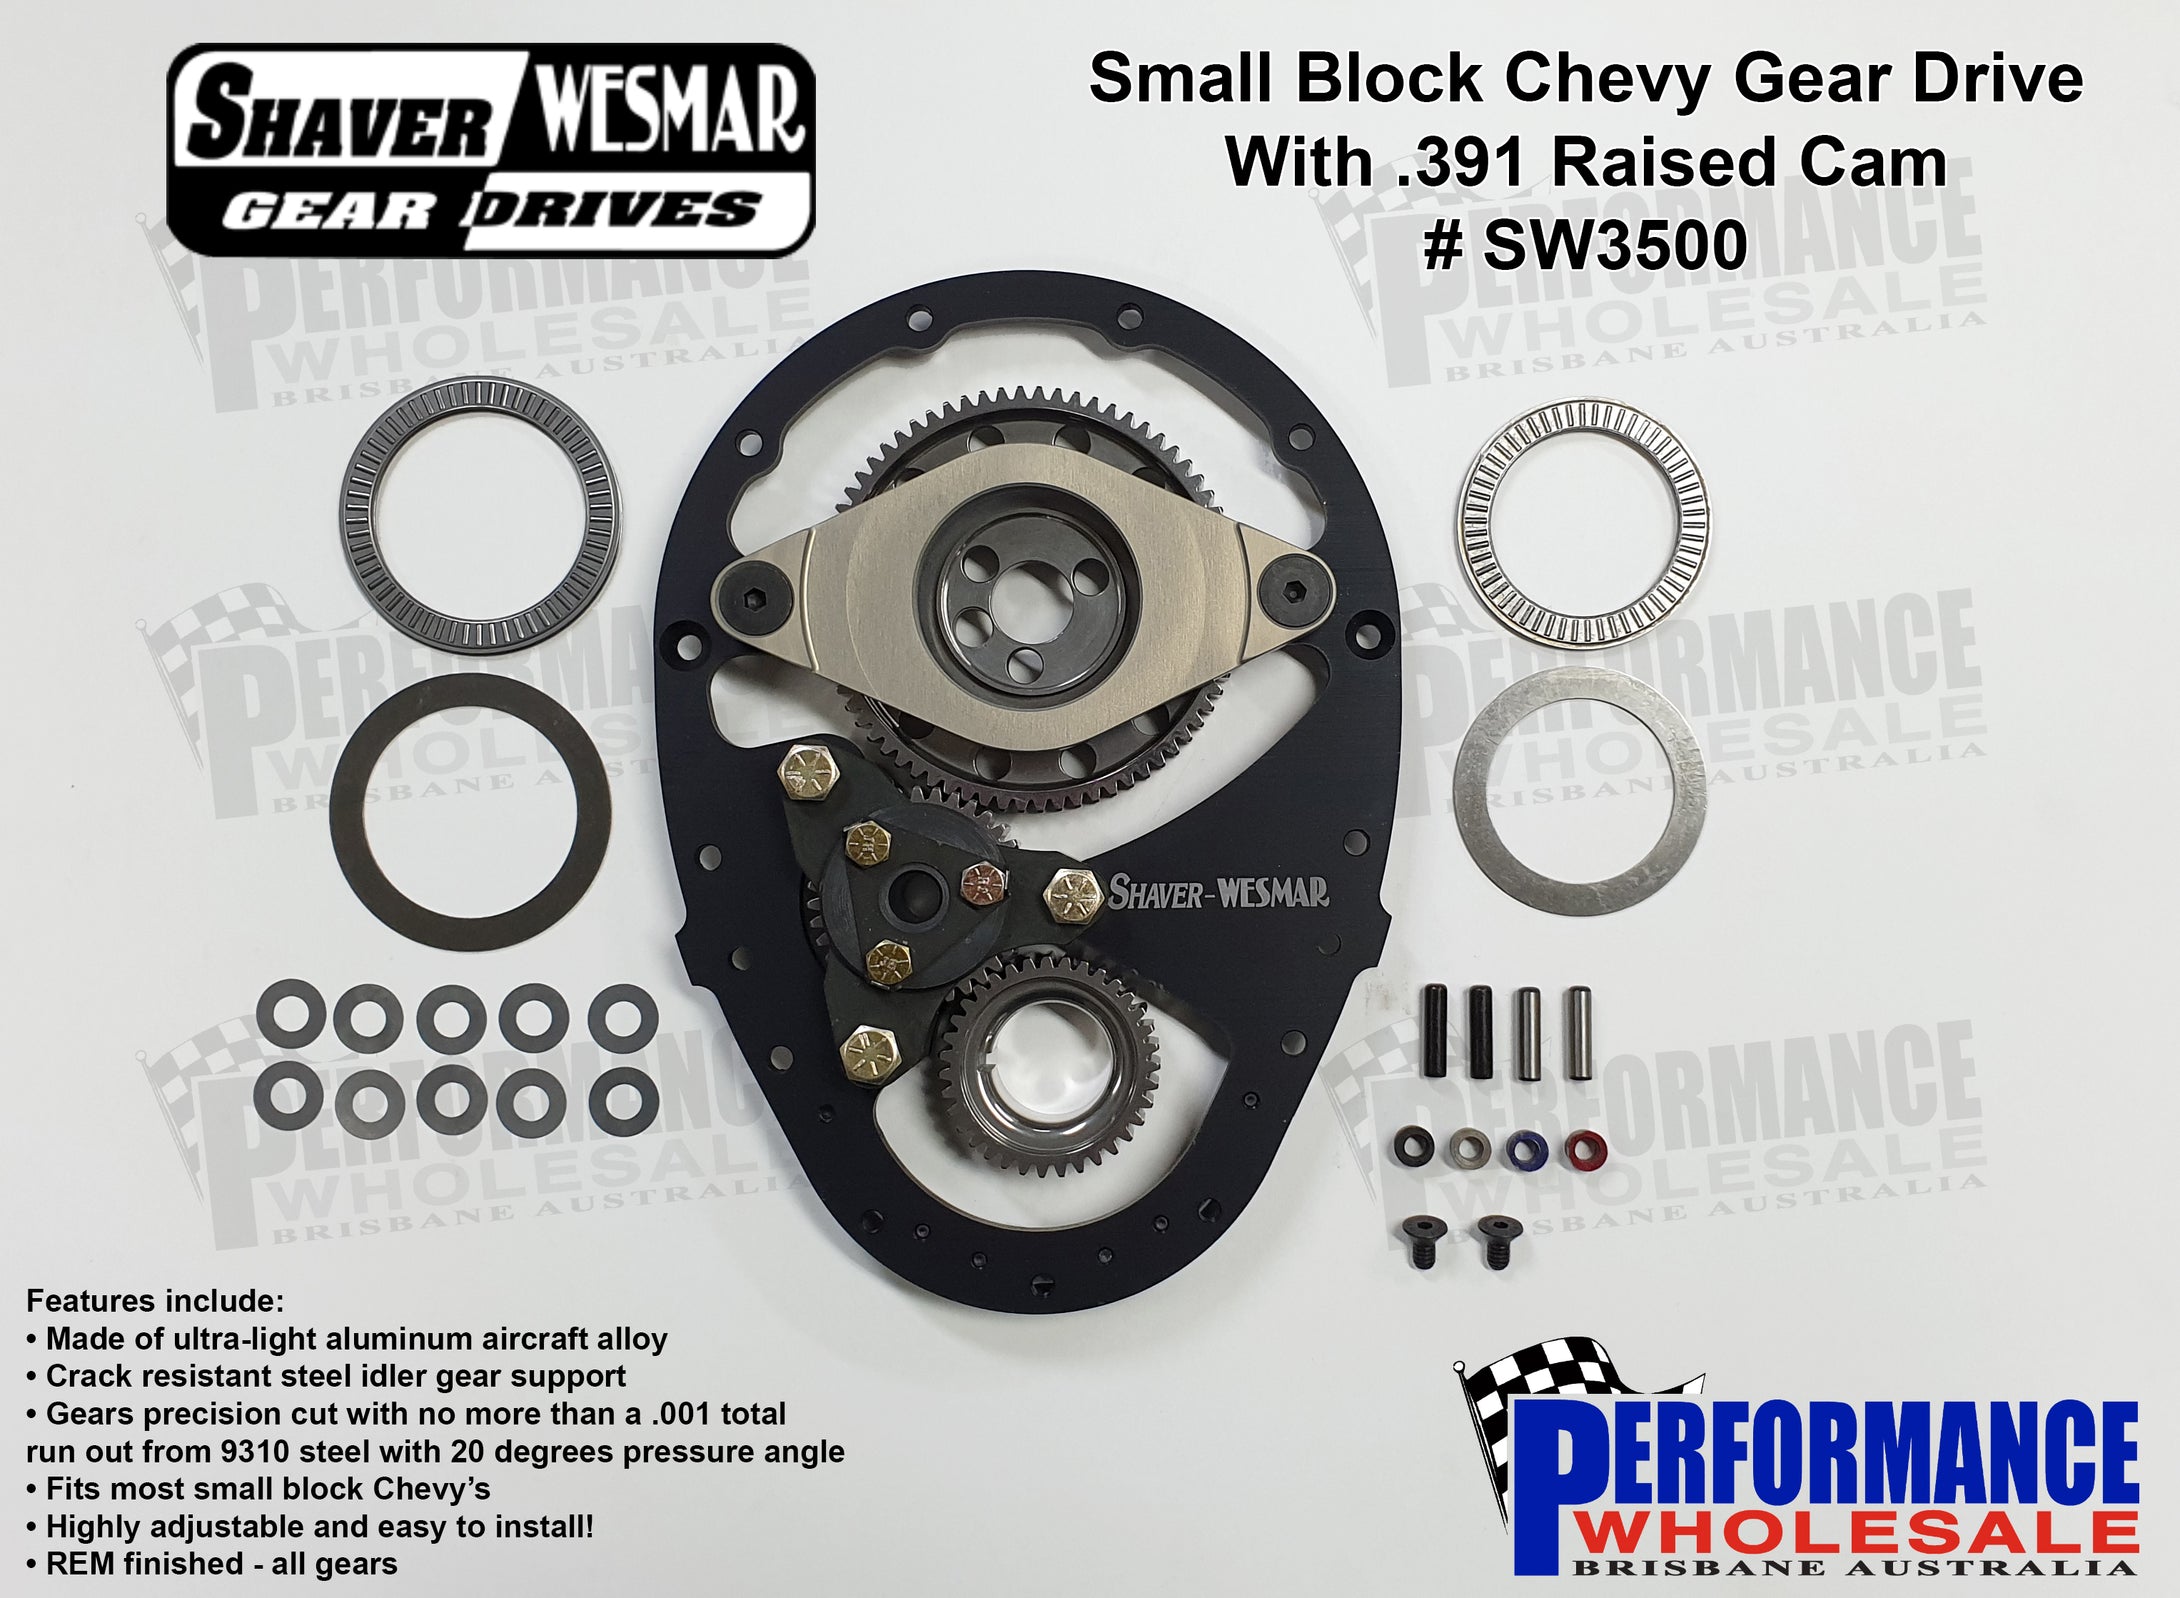 Shaver Wesmar Small Block Chevy Gear Drive .391 Raised Cam